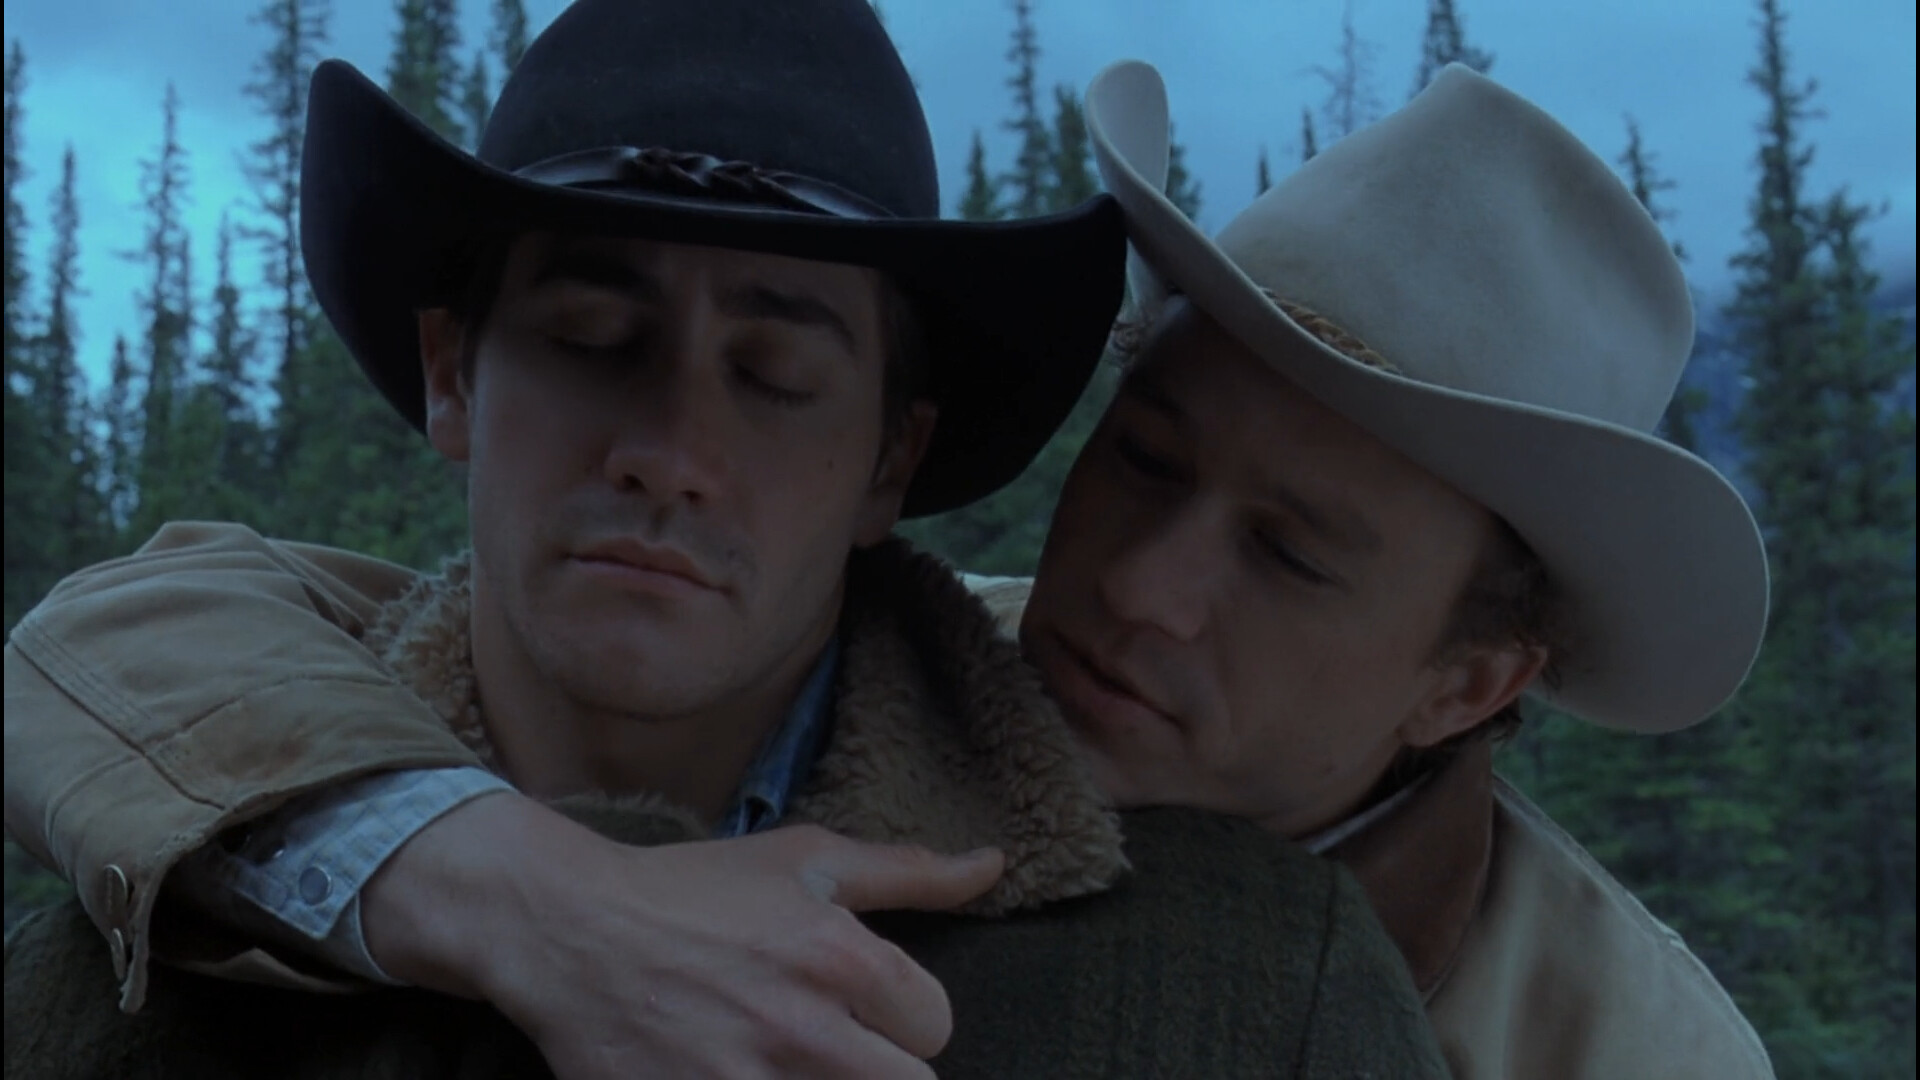 Brokeback Mountain: Intense film about a forbidden gay relationship, Directed by Ang Lee, Heath Ledger, Jake Gyllenhaal. 1920x1080 Full HD Wallpaper.